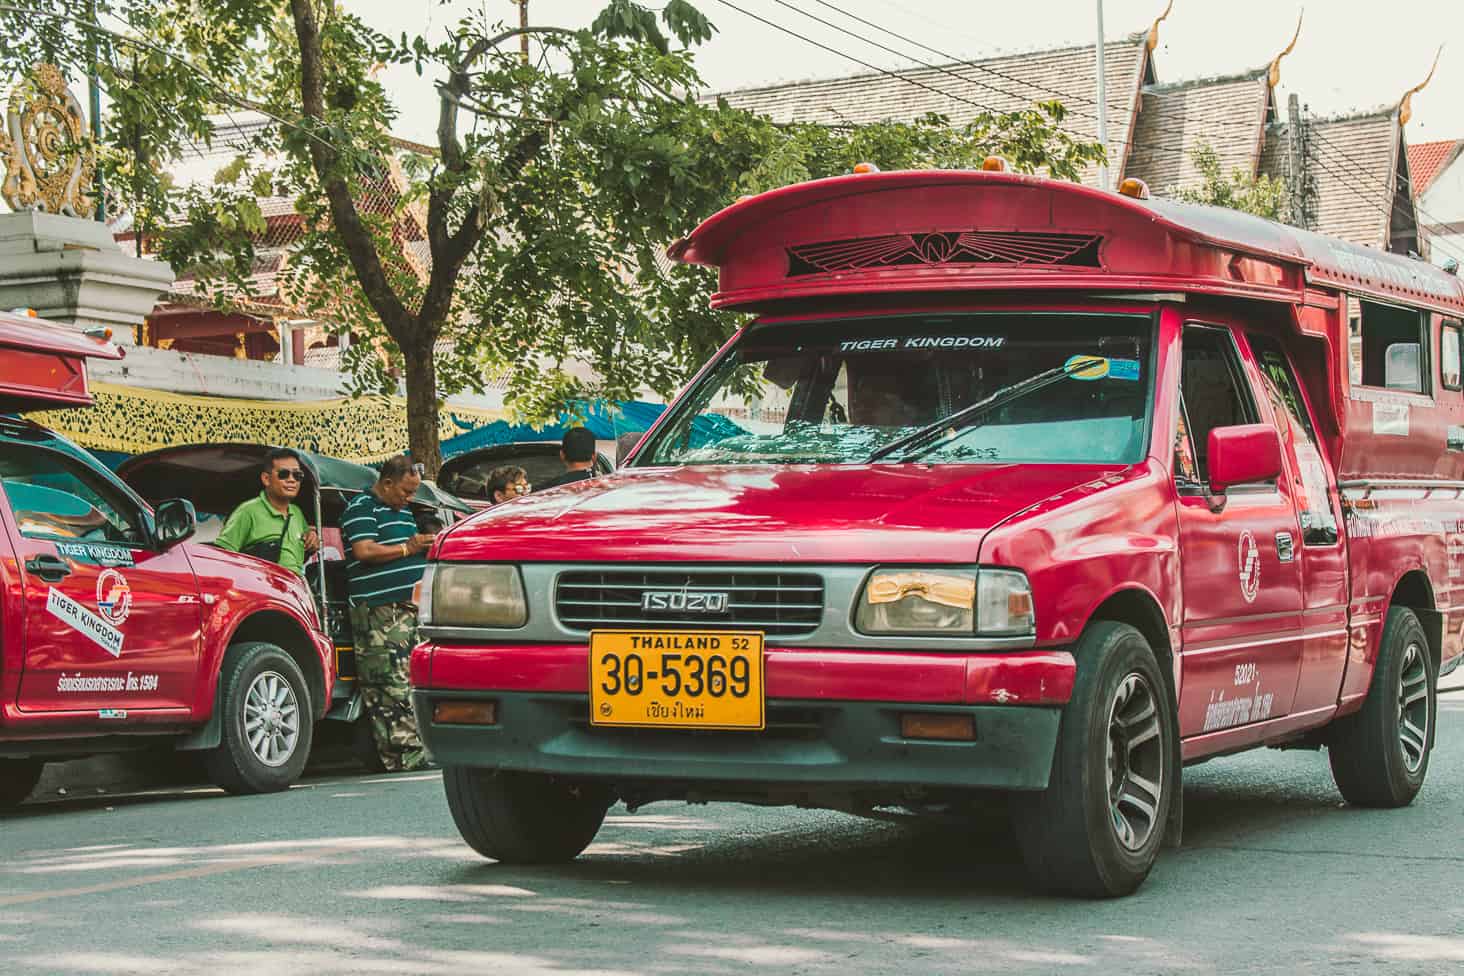 Mad Monkey Hostels Chiang Mai Transportation a Complete Guide to Getting Around the City